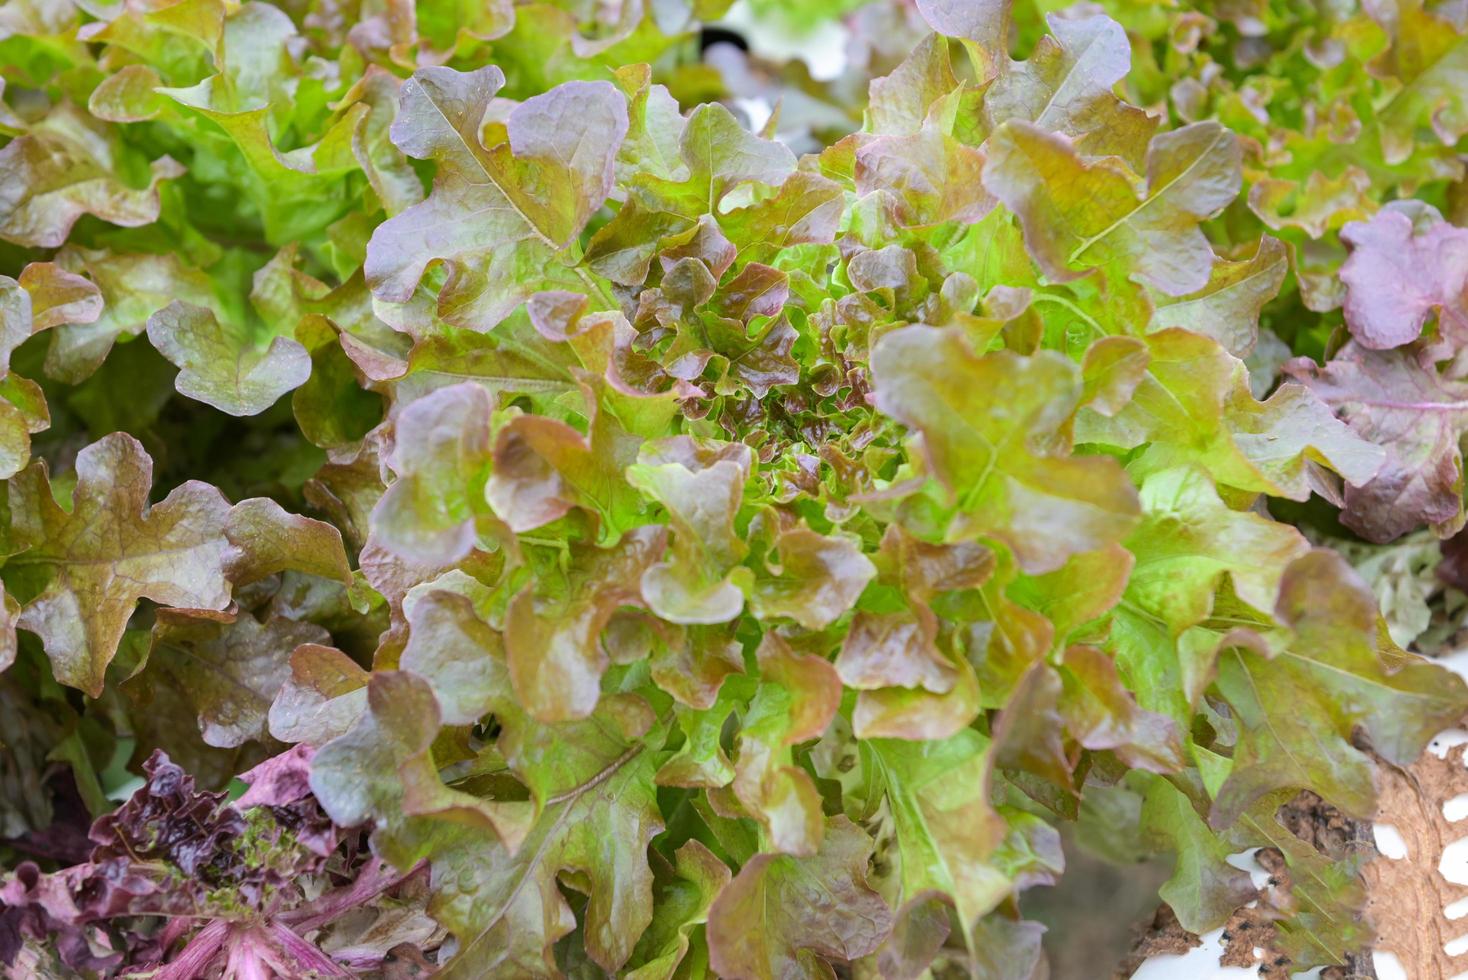 hydroponic planting in the hydroponic vegetables system on hydroponic farms red oak lettuce growing in the garden, gardener hydroponic plants on water without soil agriculture organic grow plants photo